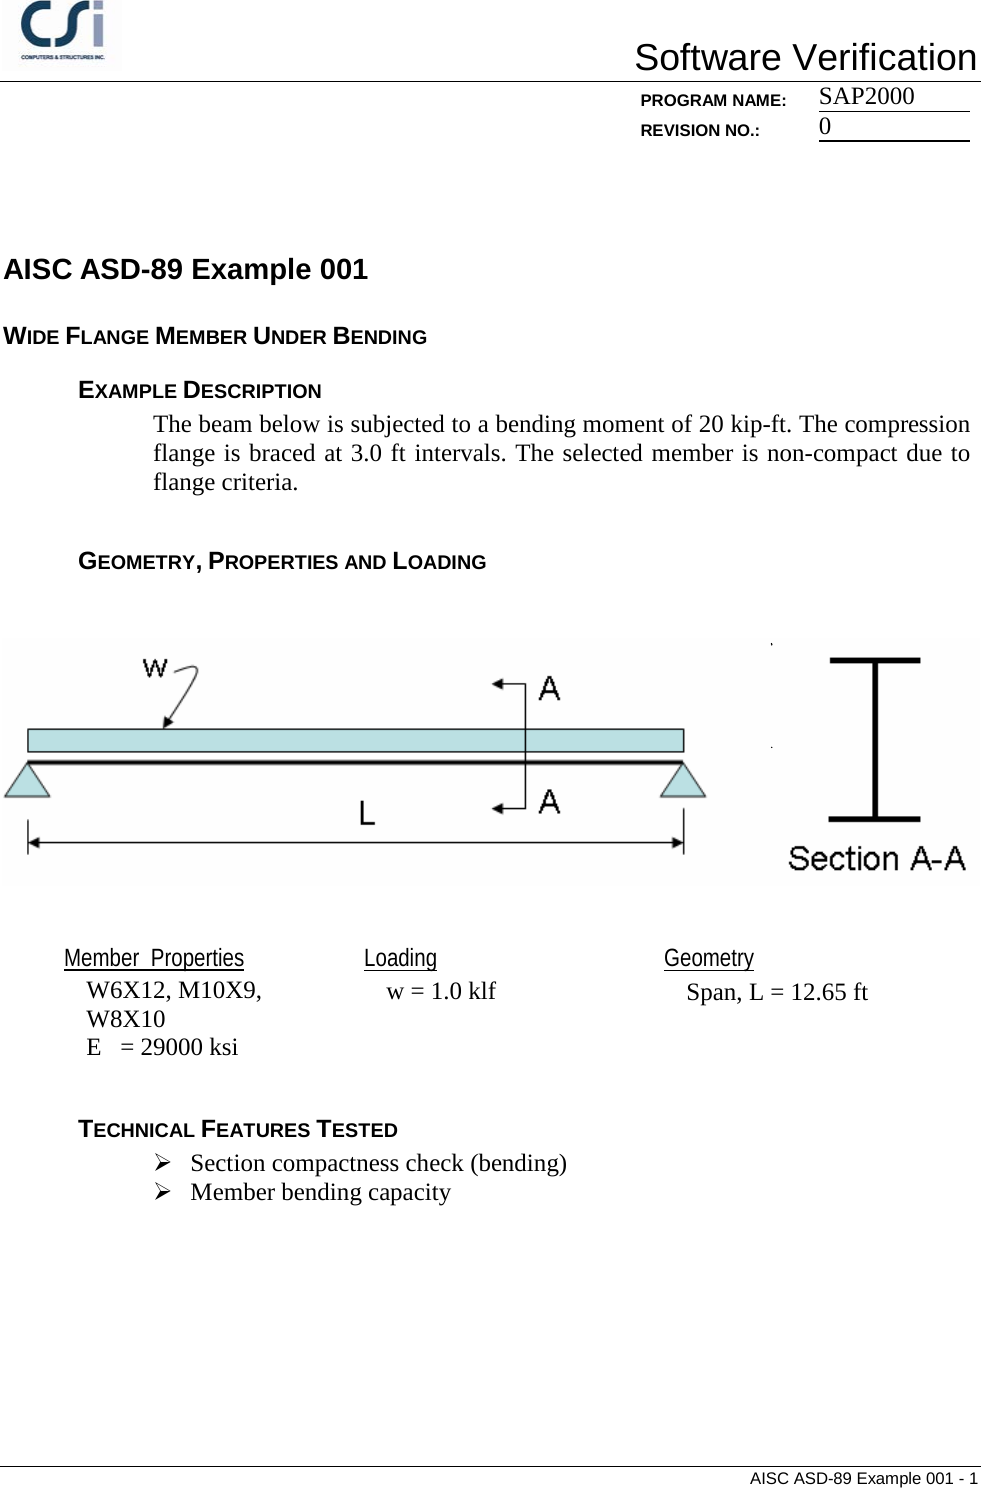 Page 1 of 5 - Contents AISC ASD-89 Example 001